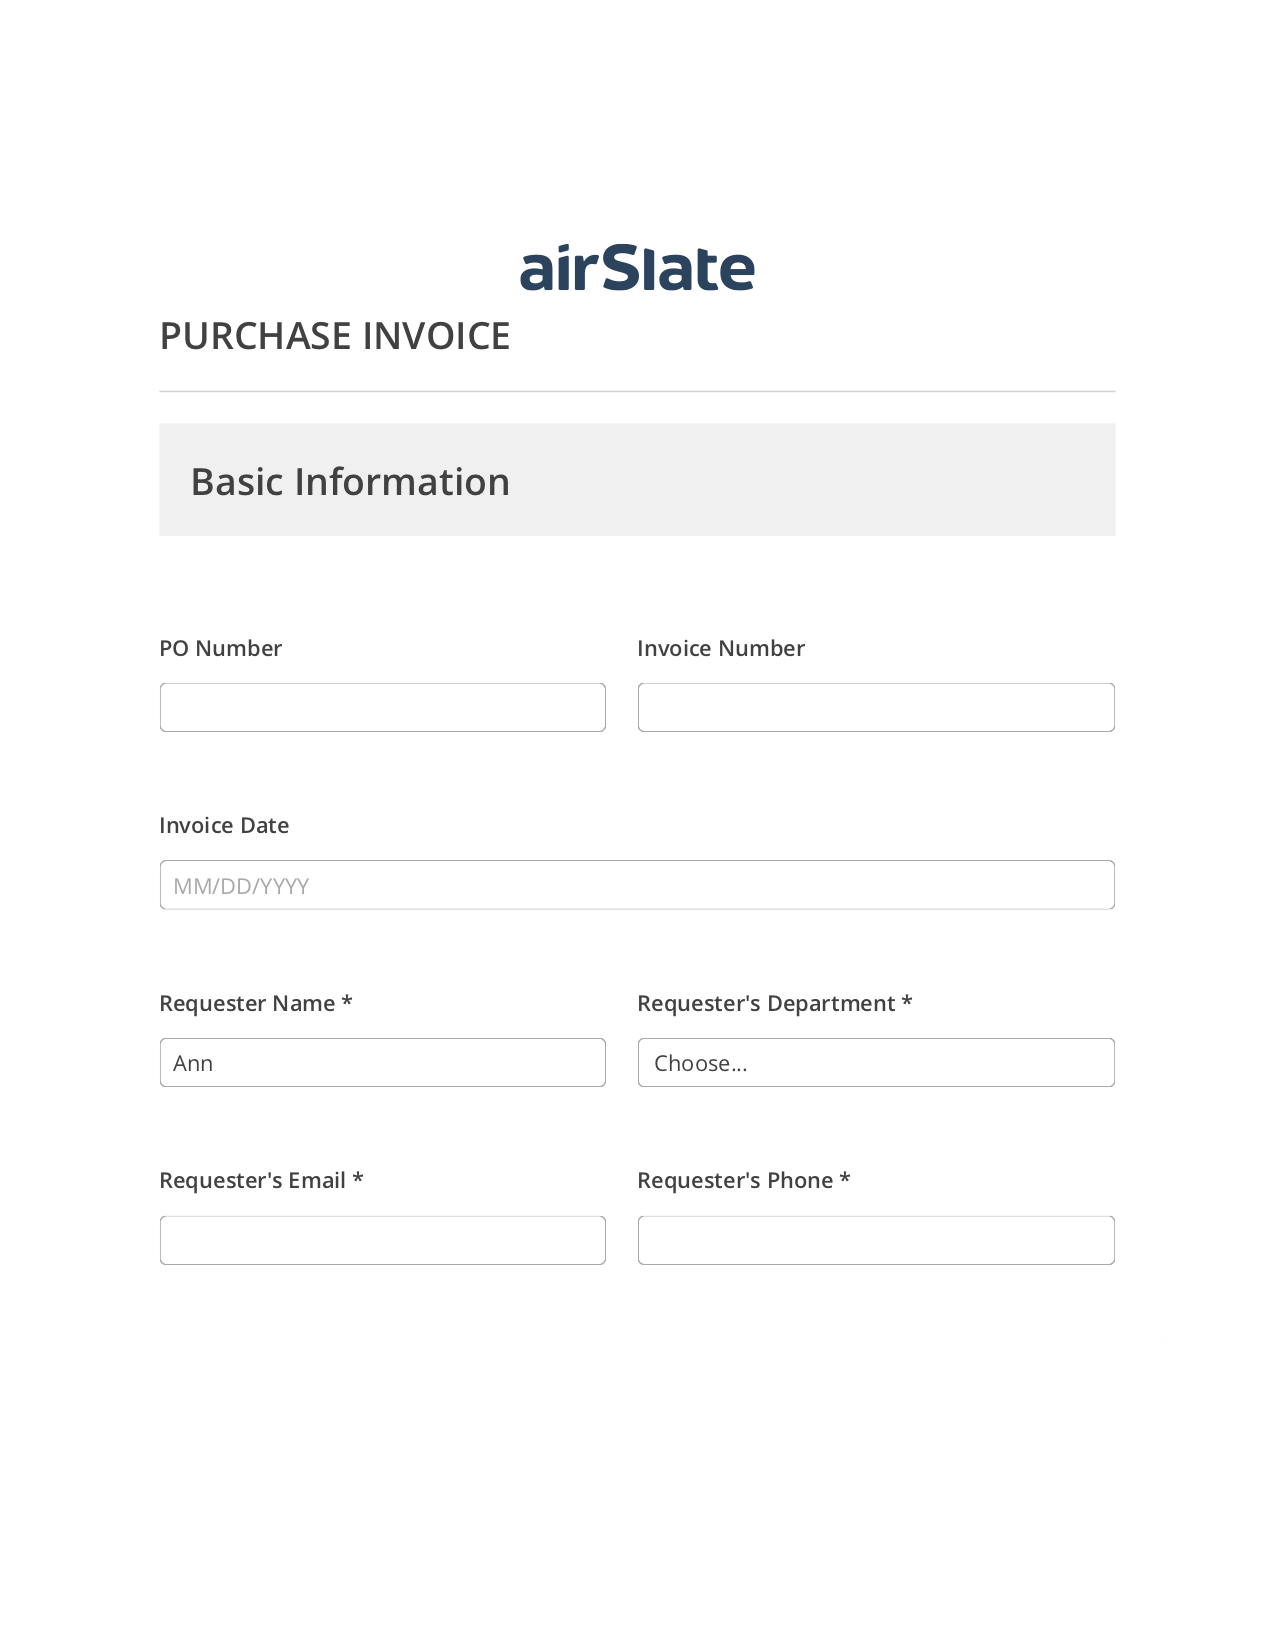 Purchase Invoice Workflow Pre-fill Slate from MS Dynamics 365 Records Bot, Create slate from another Flow Bot, OneDrive Bot